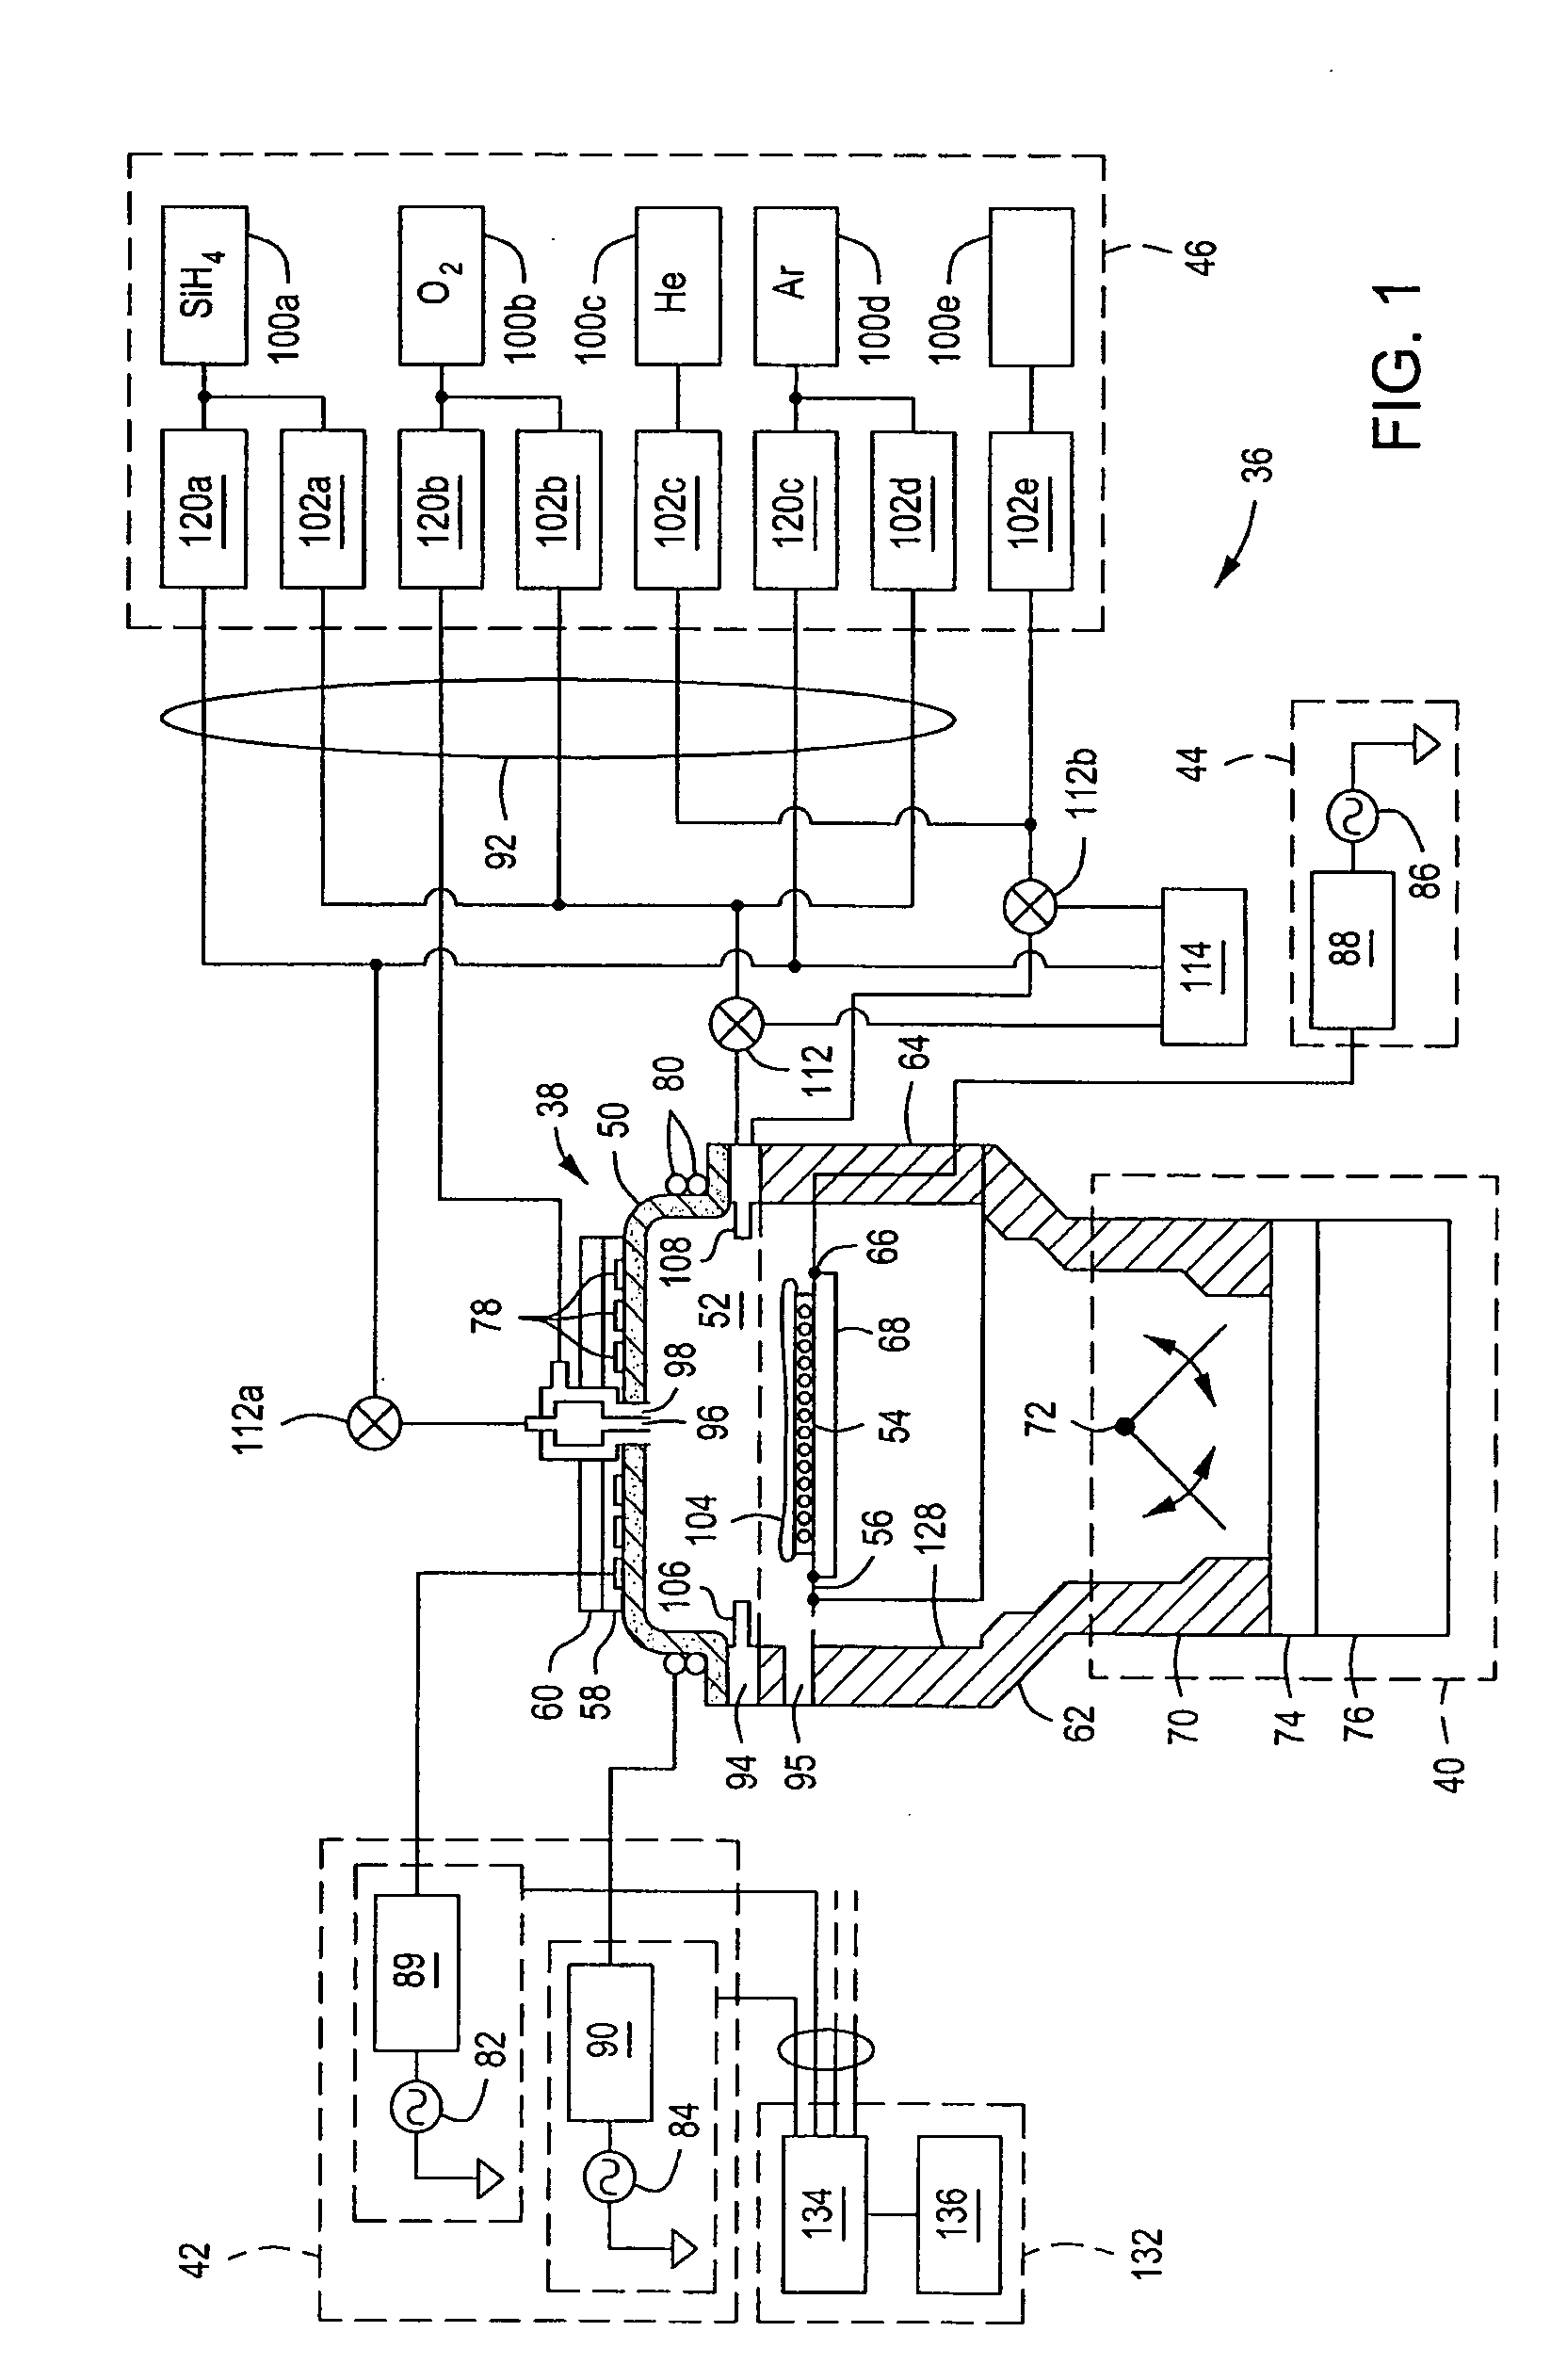 Method and apparatus for providing an electrostatic chuck with reduced plasma penetration and arcing